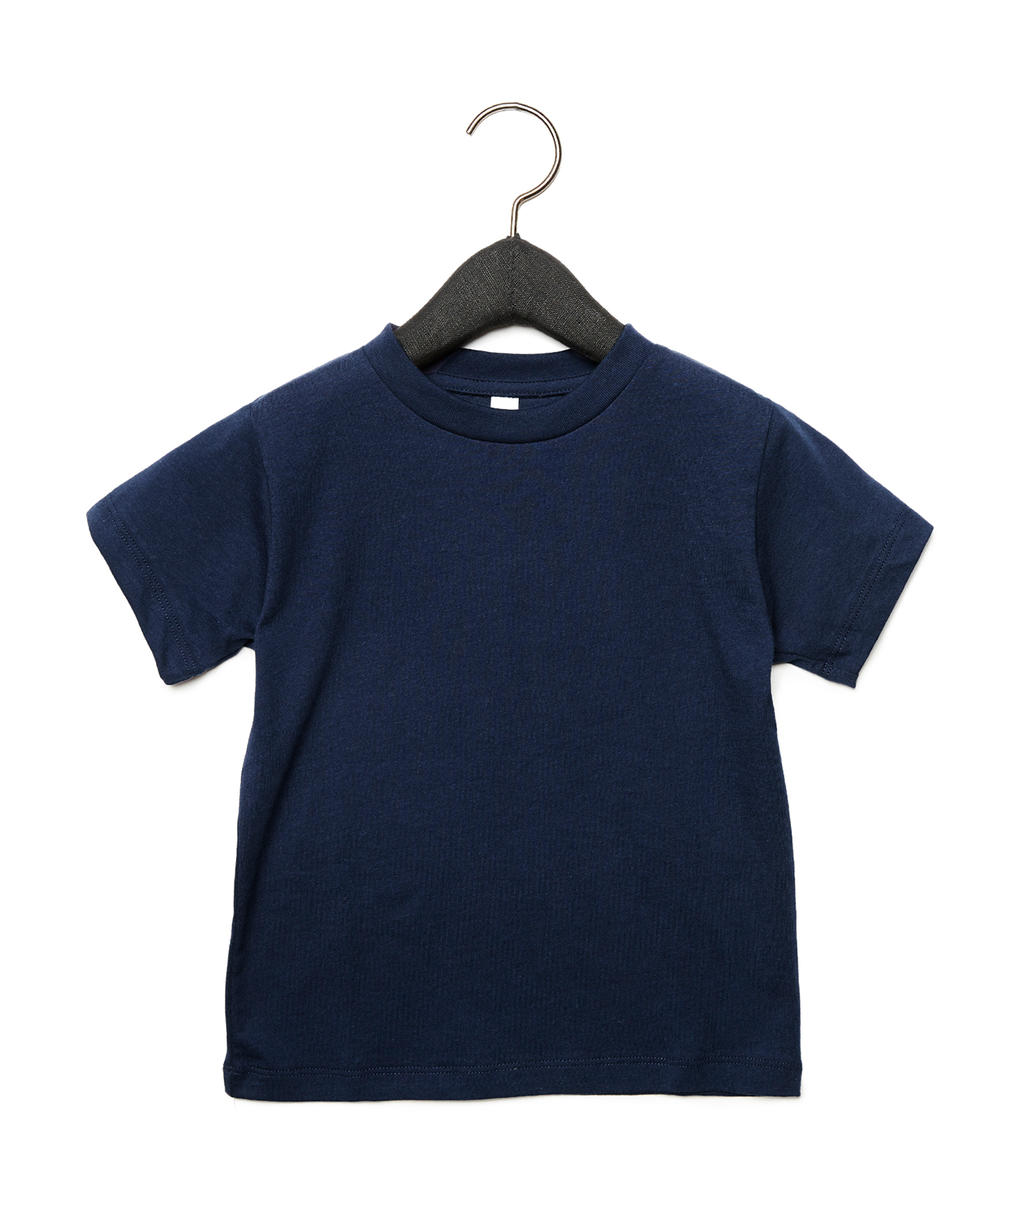  Toddler Jersey Short Sleeve Tee in Farbe Navy